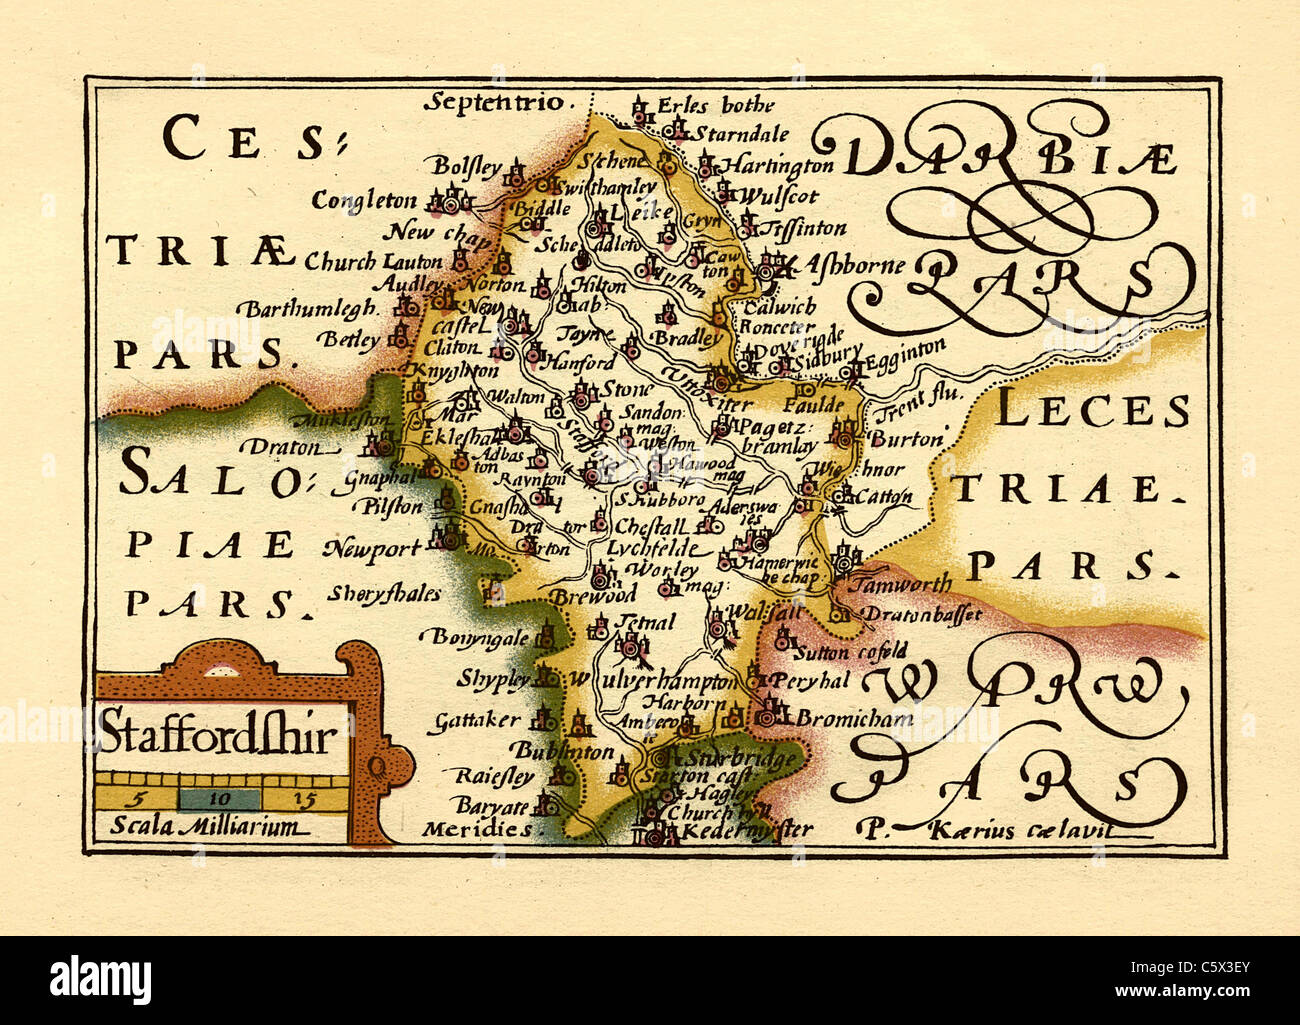 Staffordshire - Old English County Map by John Speed, circa 1625 Stock Photo